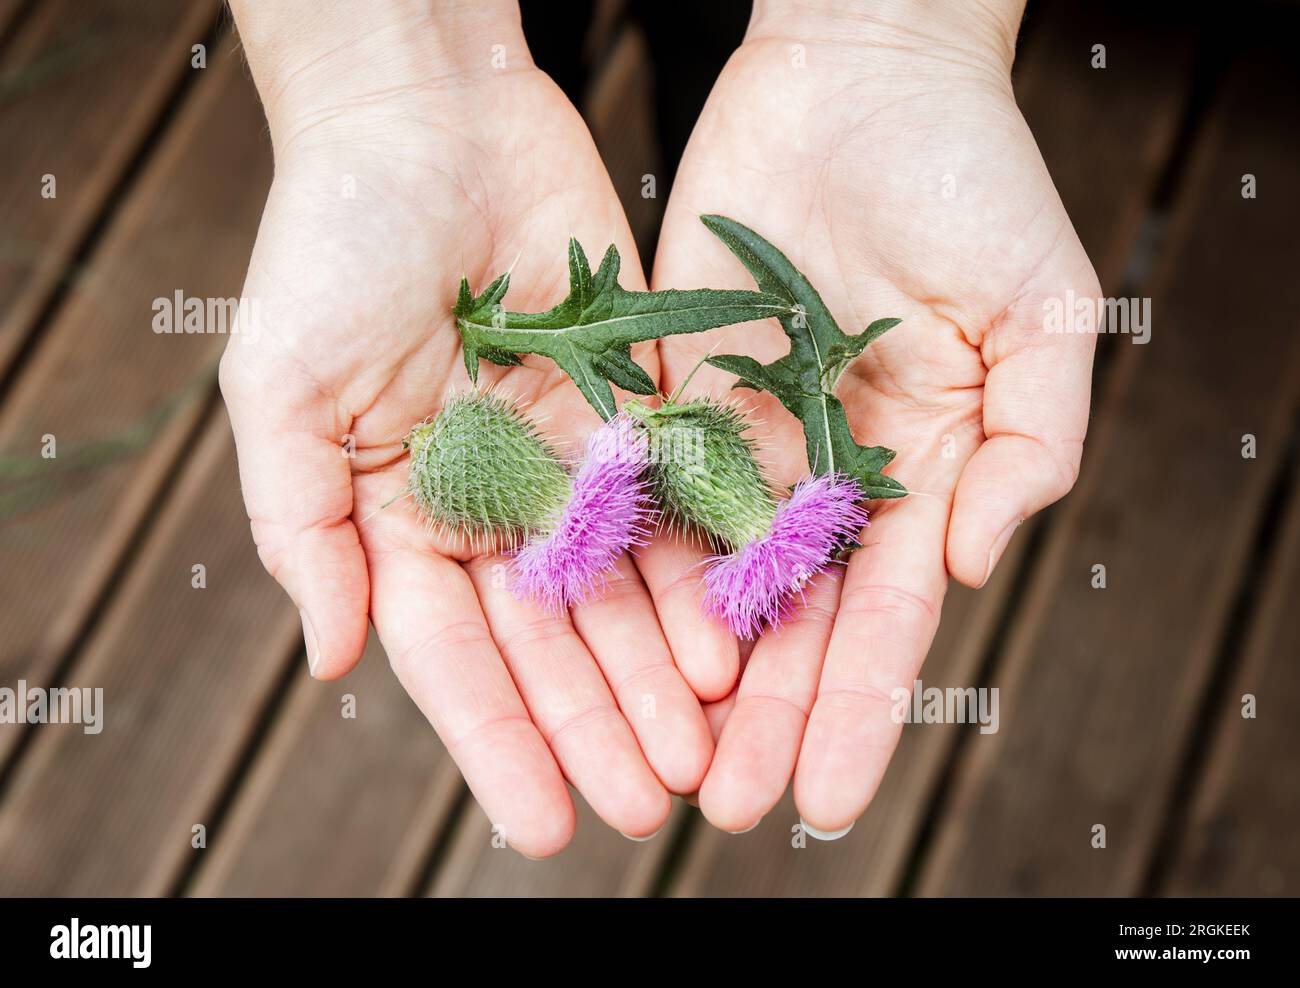 Onopordum acanthium, cotton thistle, Scotch or Scottish thistle flower blossoms on woman palms hands. Herbal medicine concept. Stock Photo